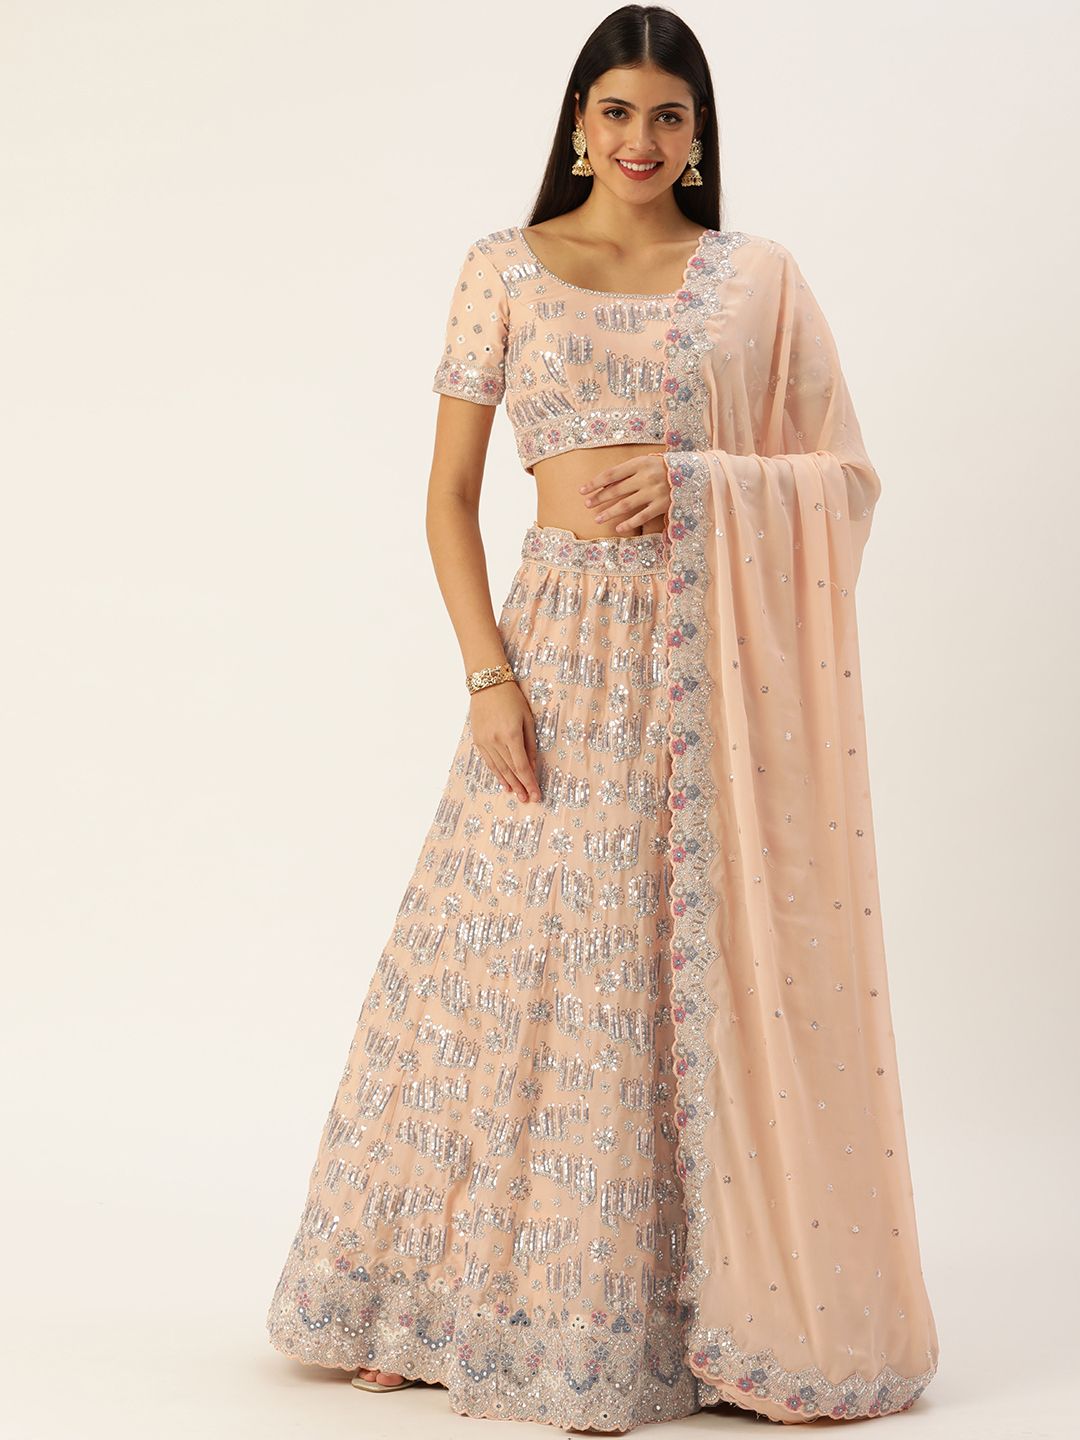 panchhi Peach-Coloured & Embroidered Sequinned Semi-Stitched Lehenga & Unstitched Blouse With Dupatta Price in India